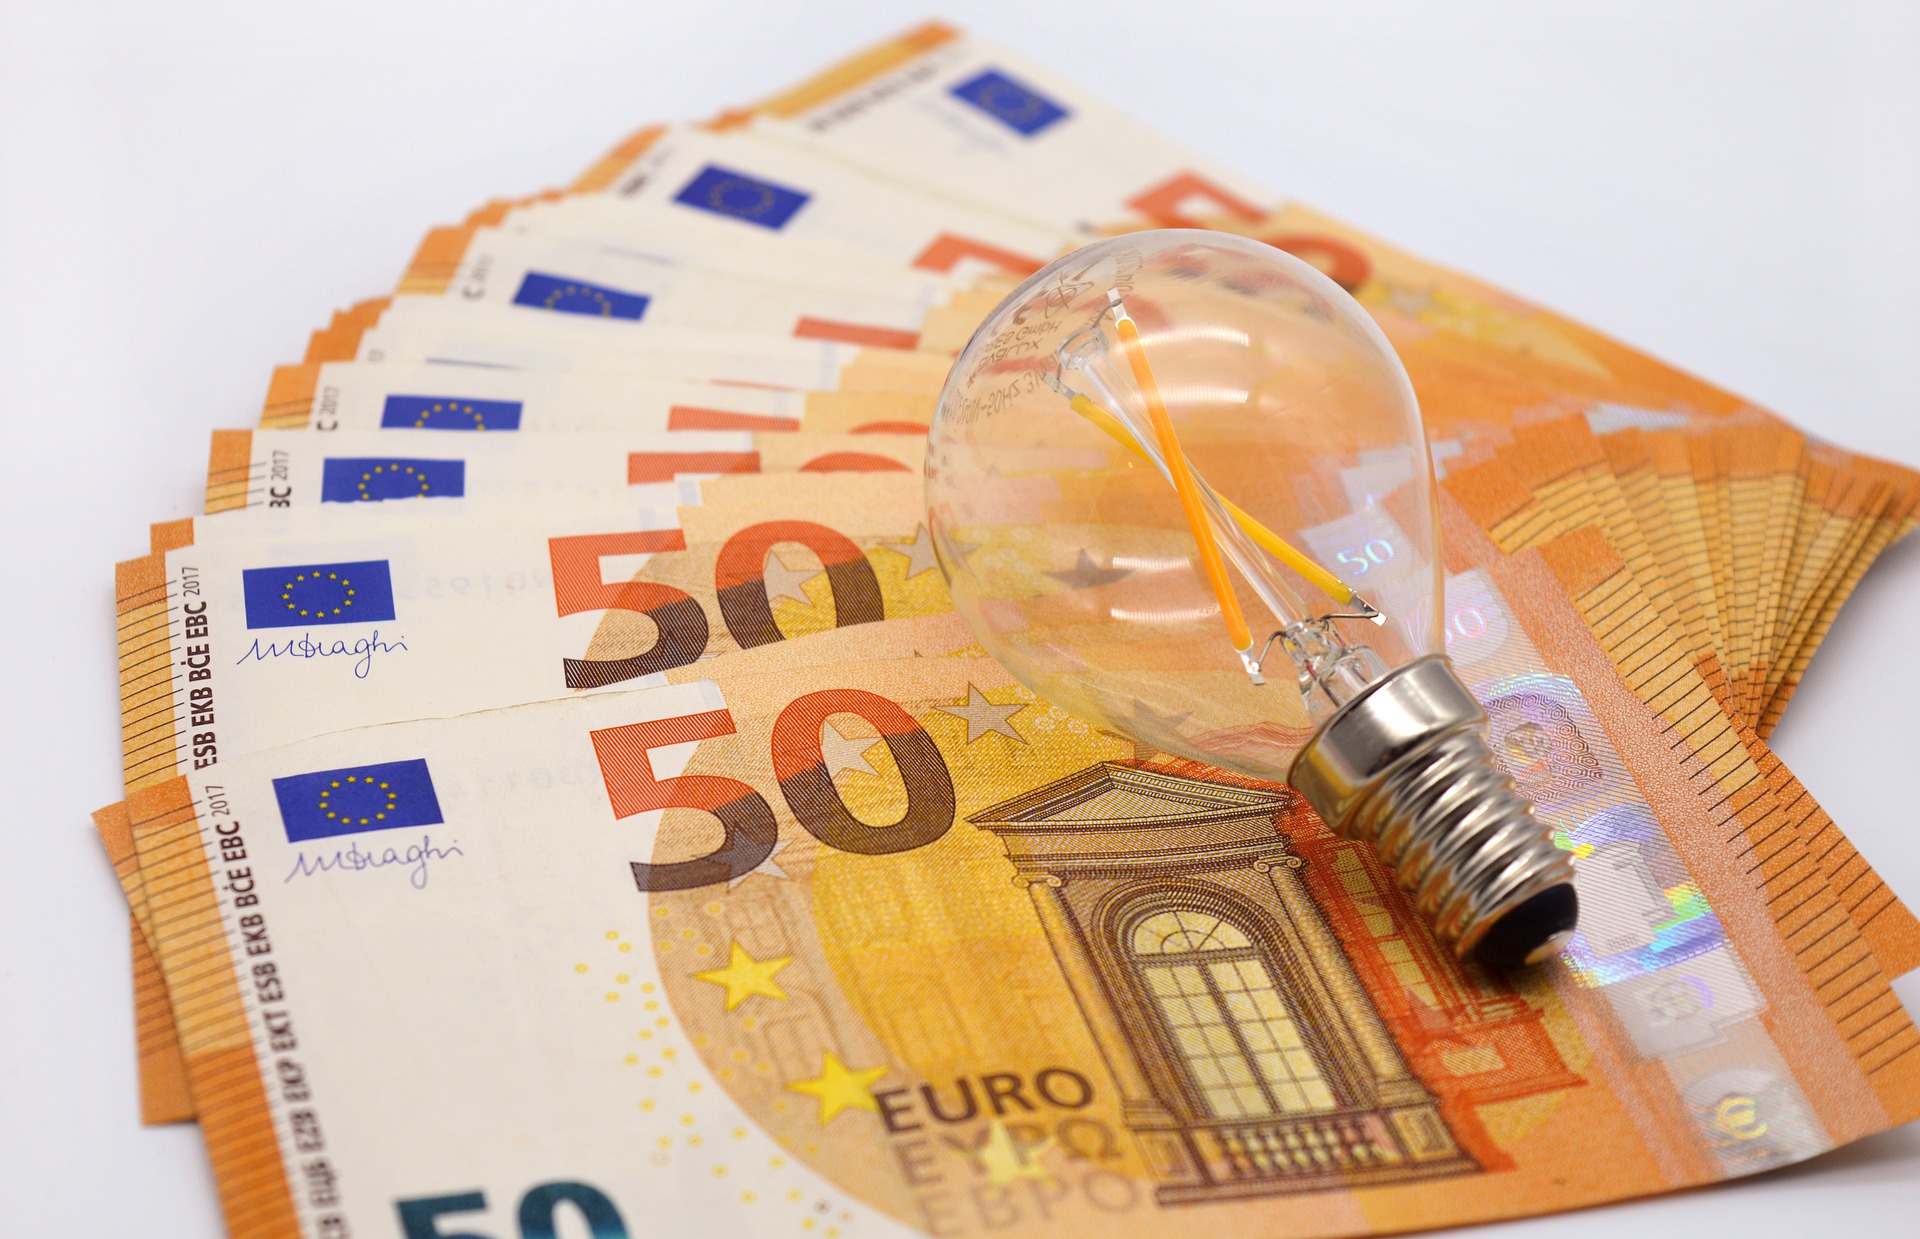 Electricity: How the extraordinary tax on nat. gas made Greece more expensive in the EU